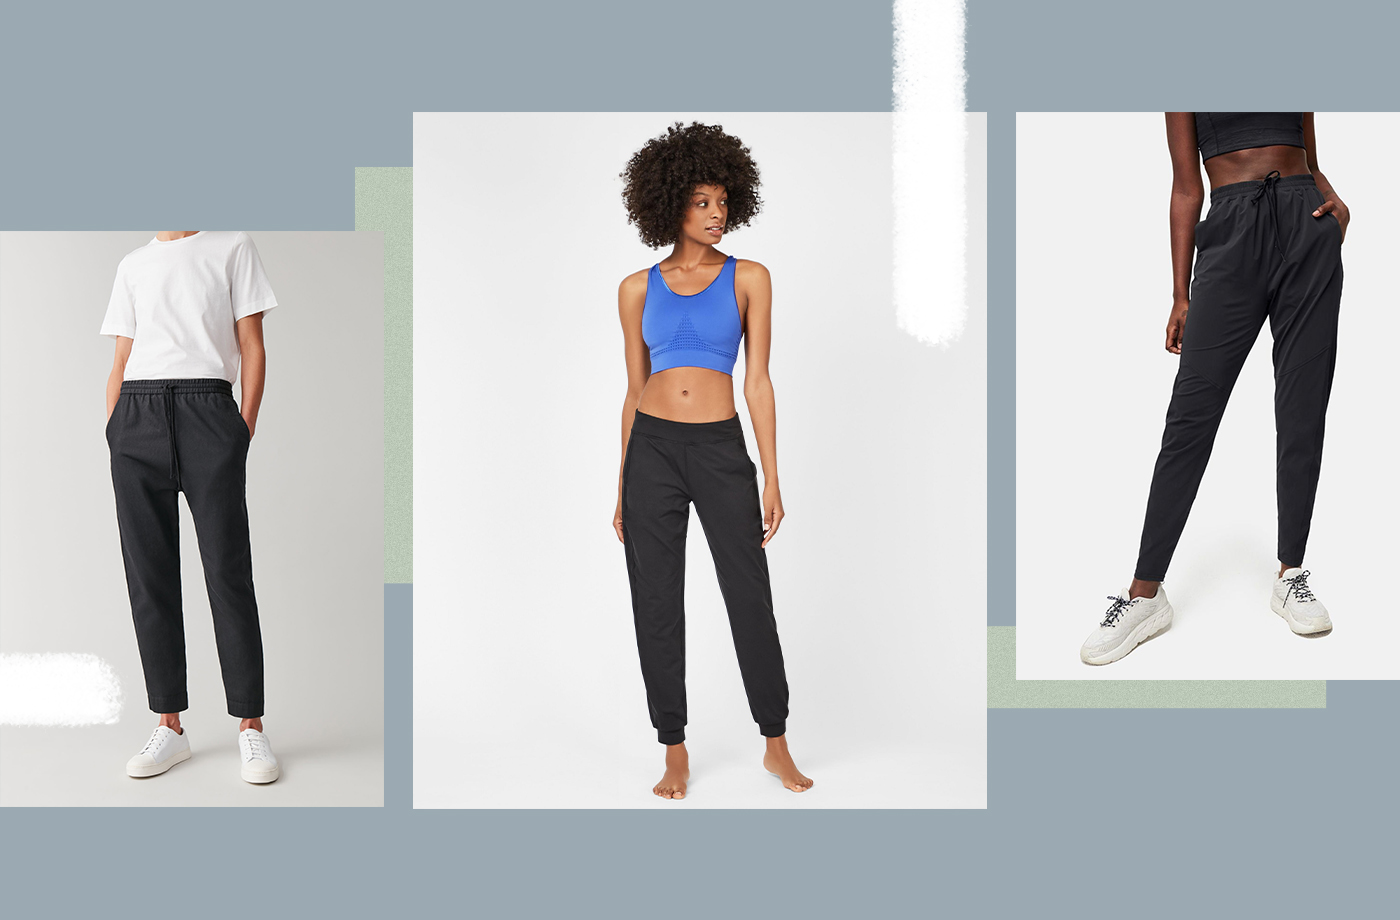 What Matches With Black Sweatpants? – solowomen